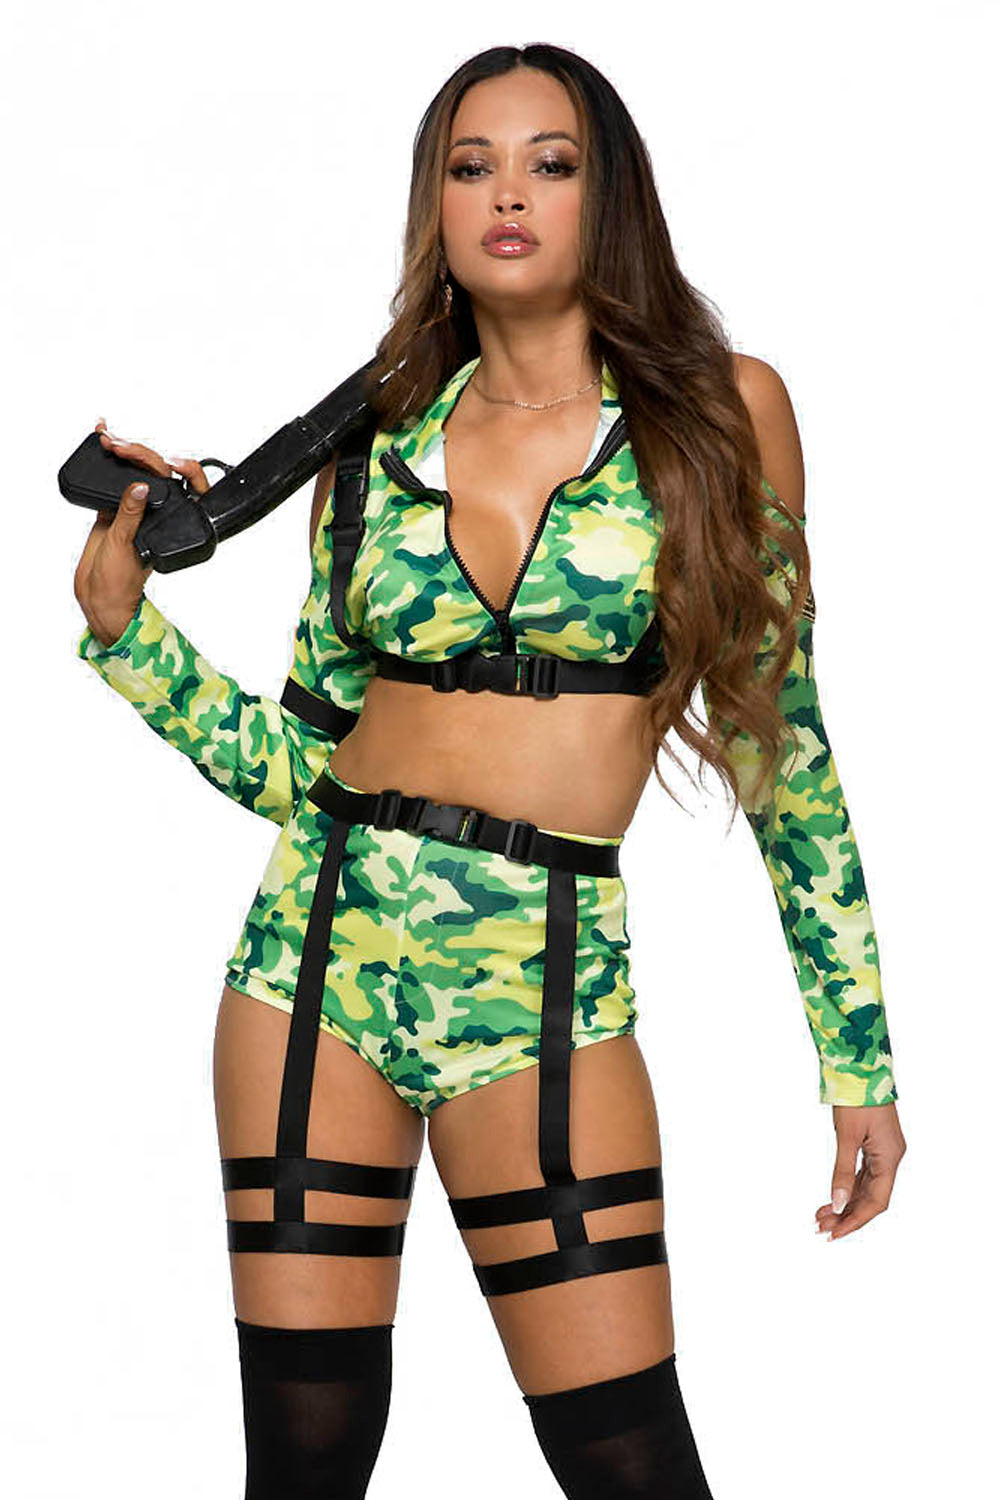 Special Operations Paratrooper Women's Costume